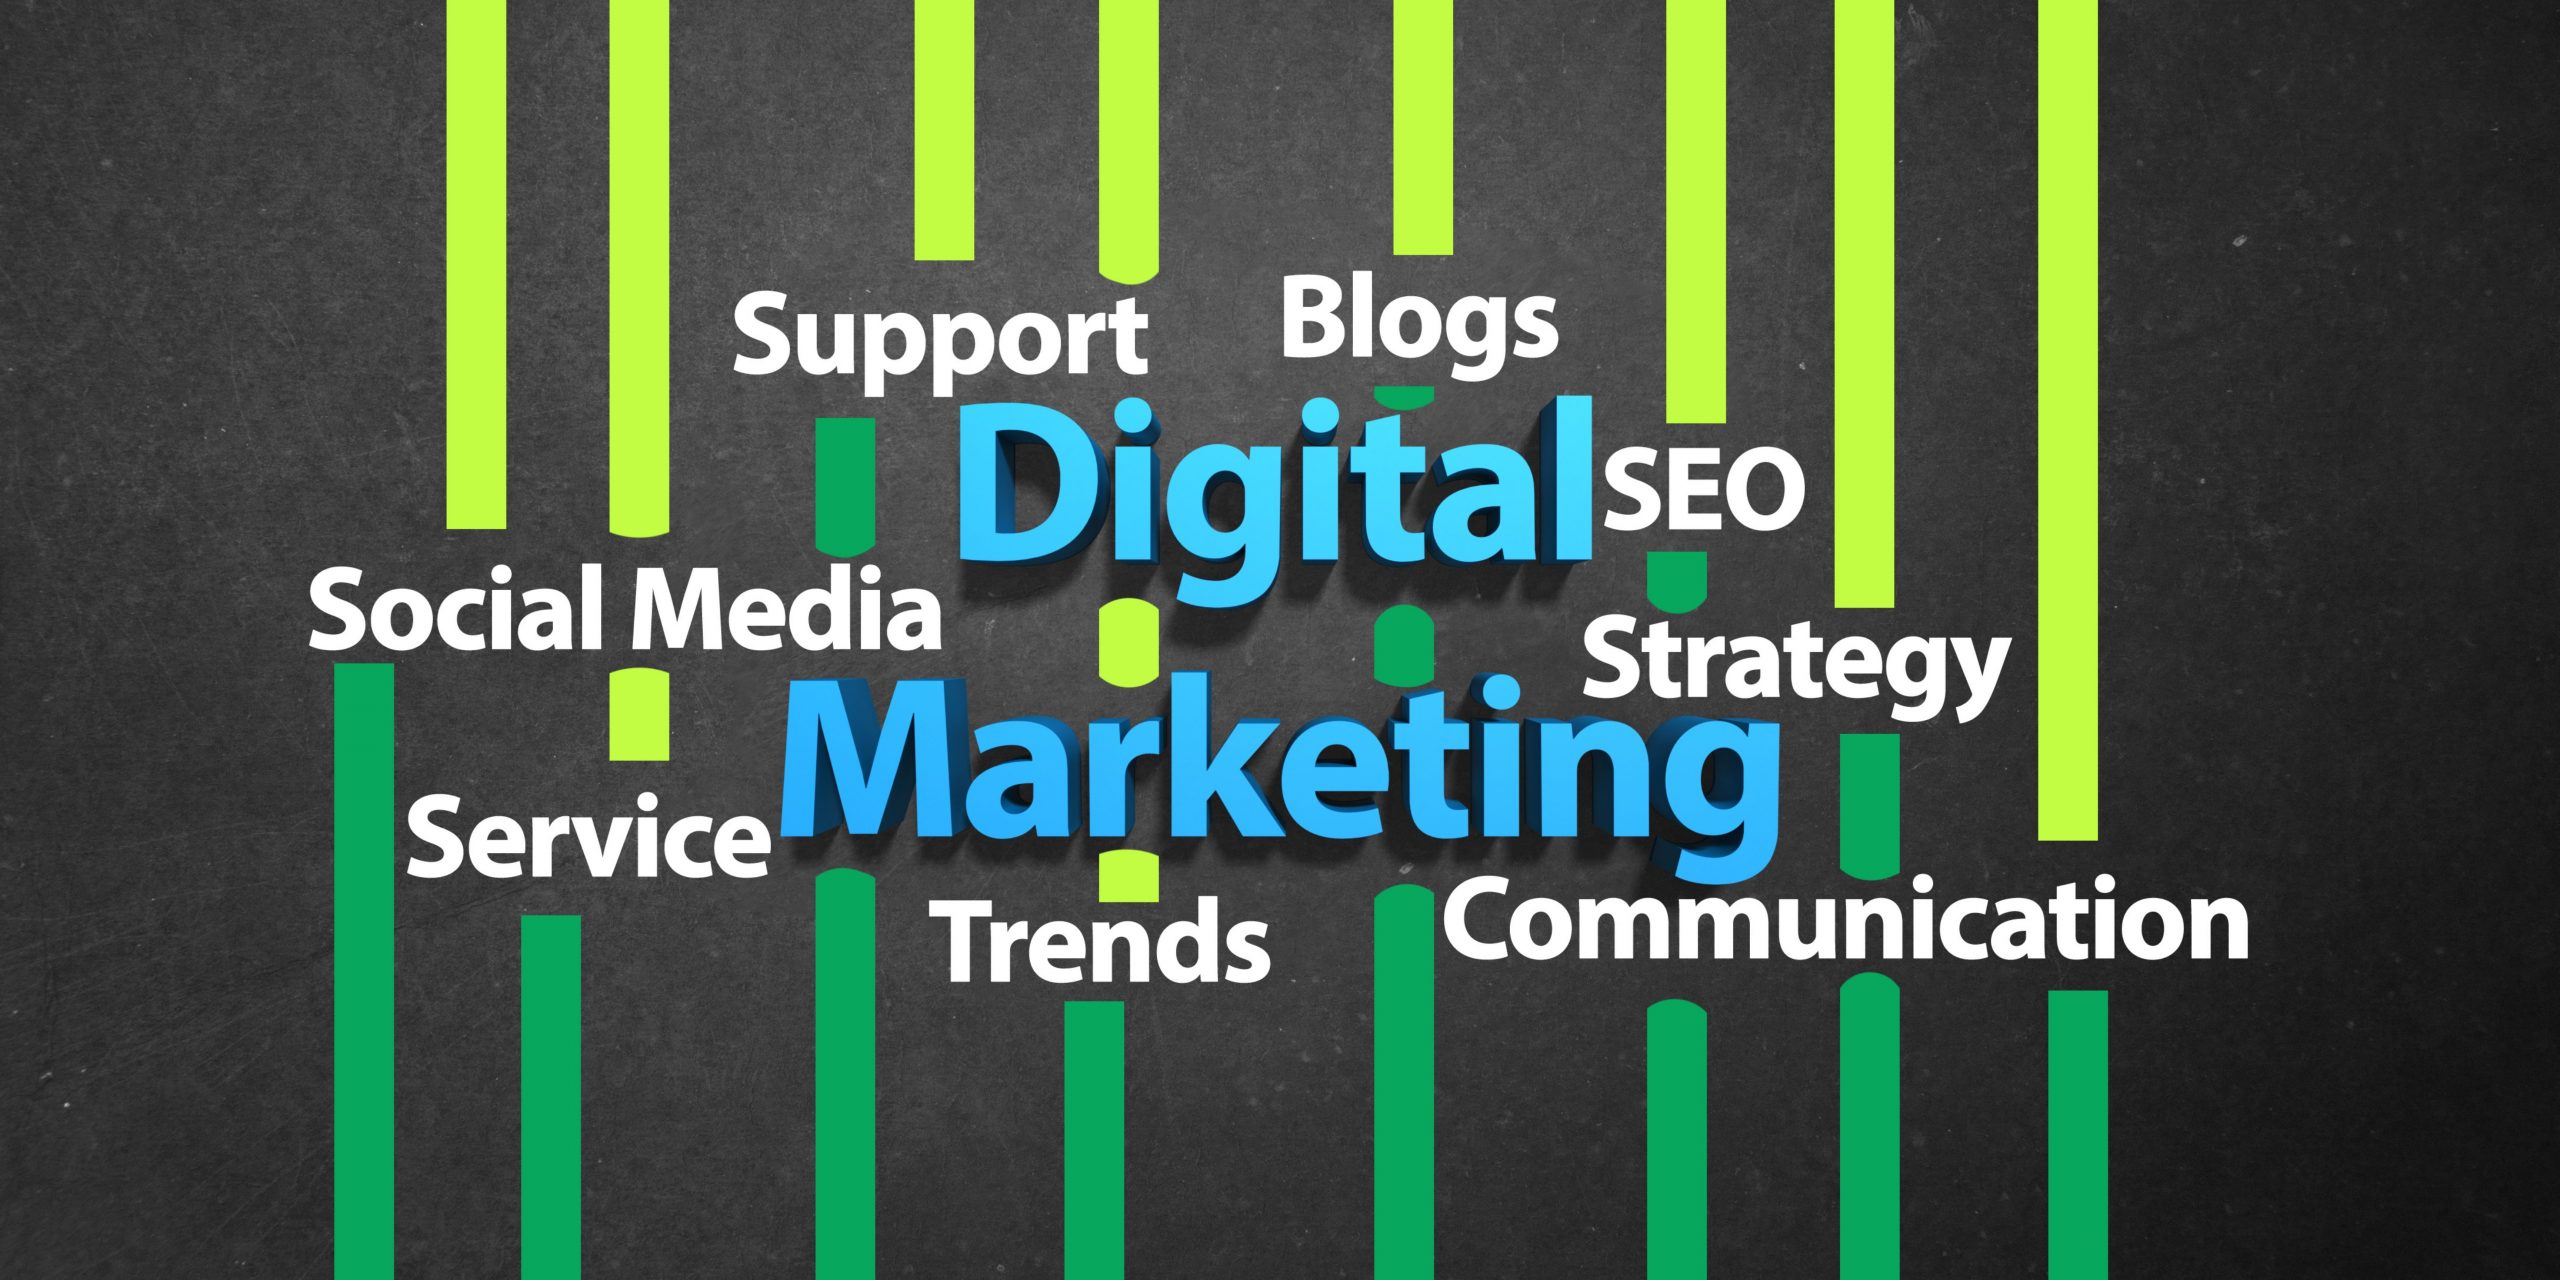 Are you dealing with a digital marketing agency for the first time